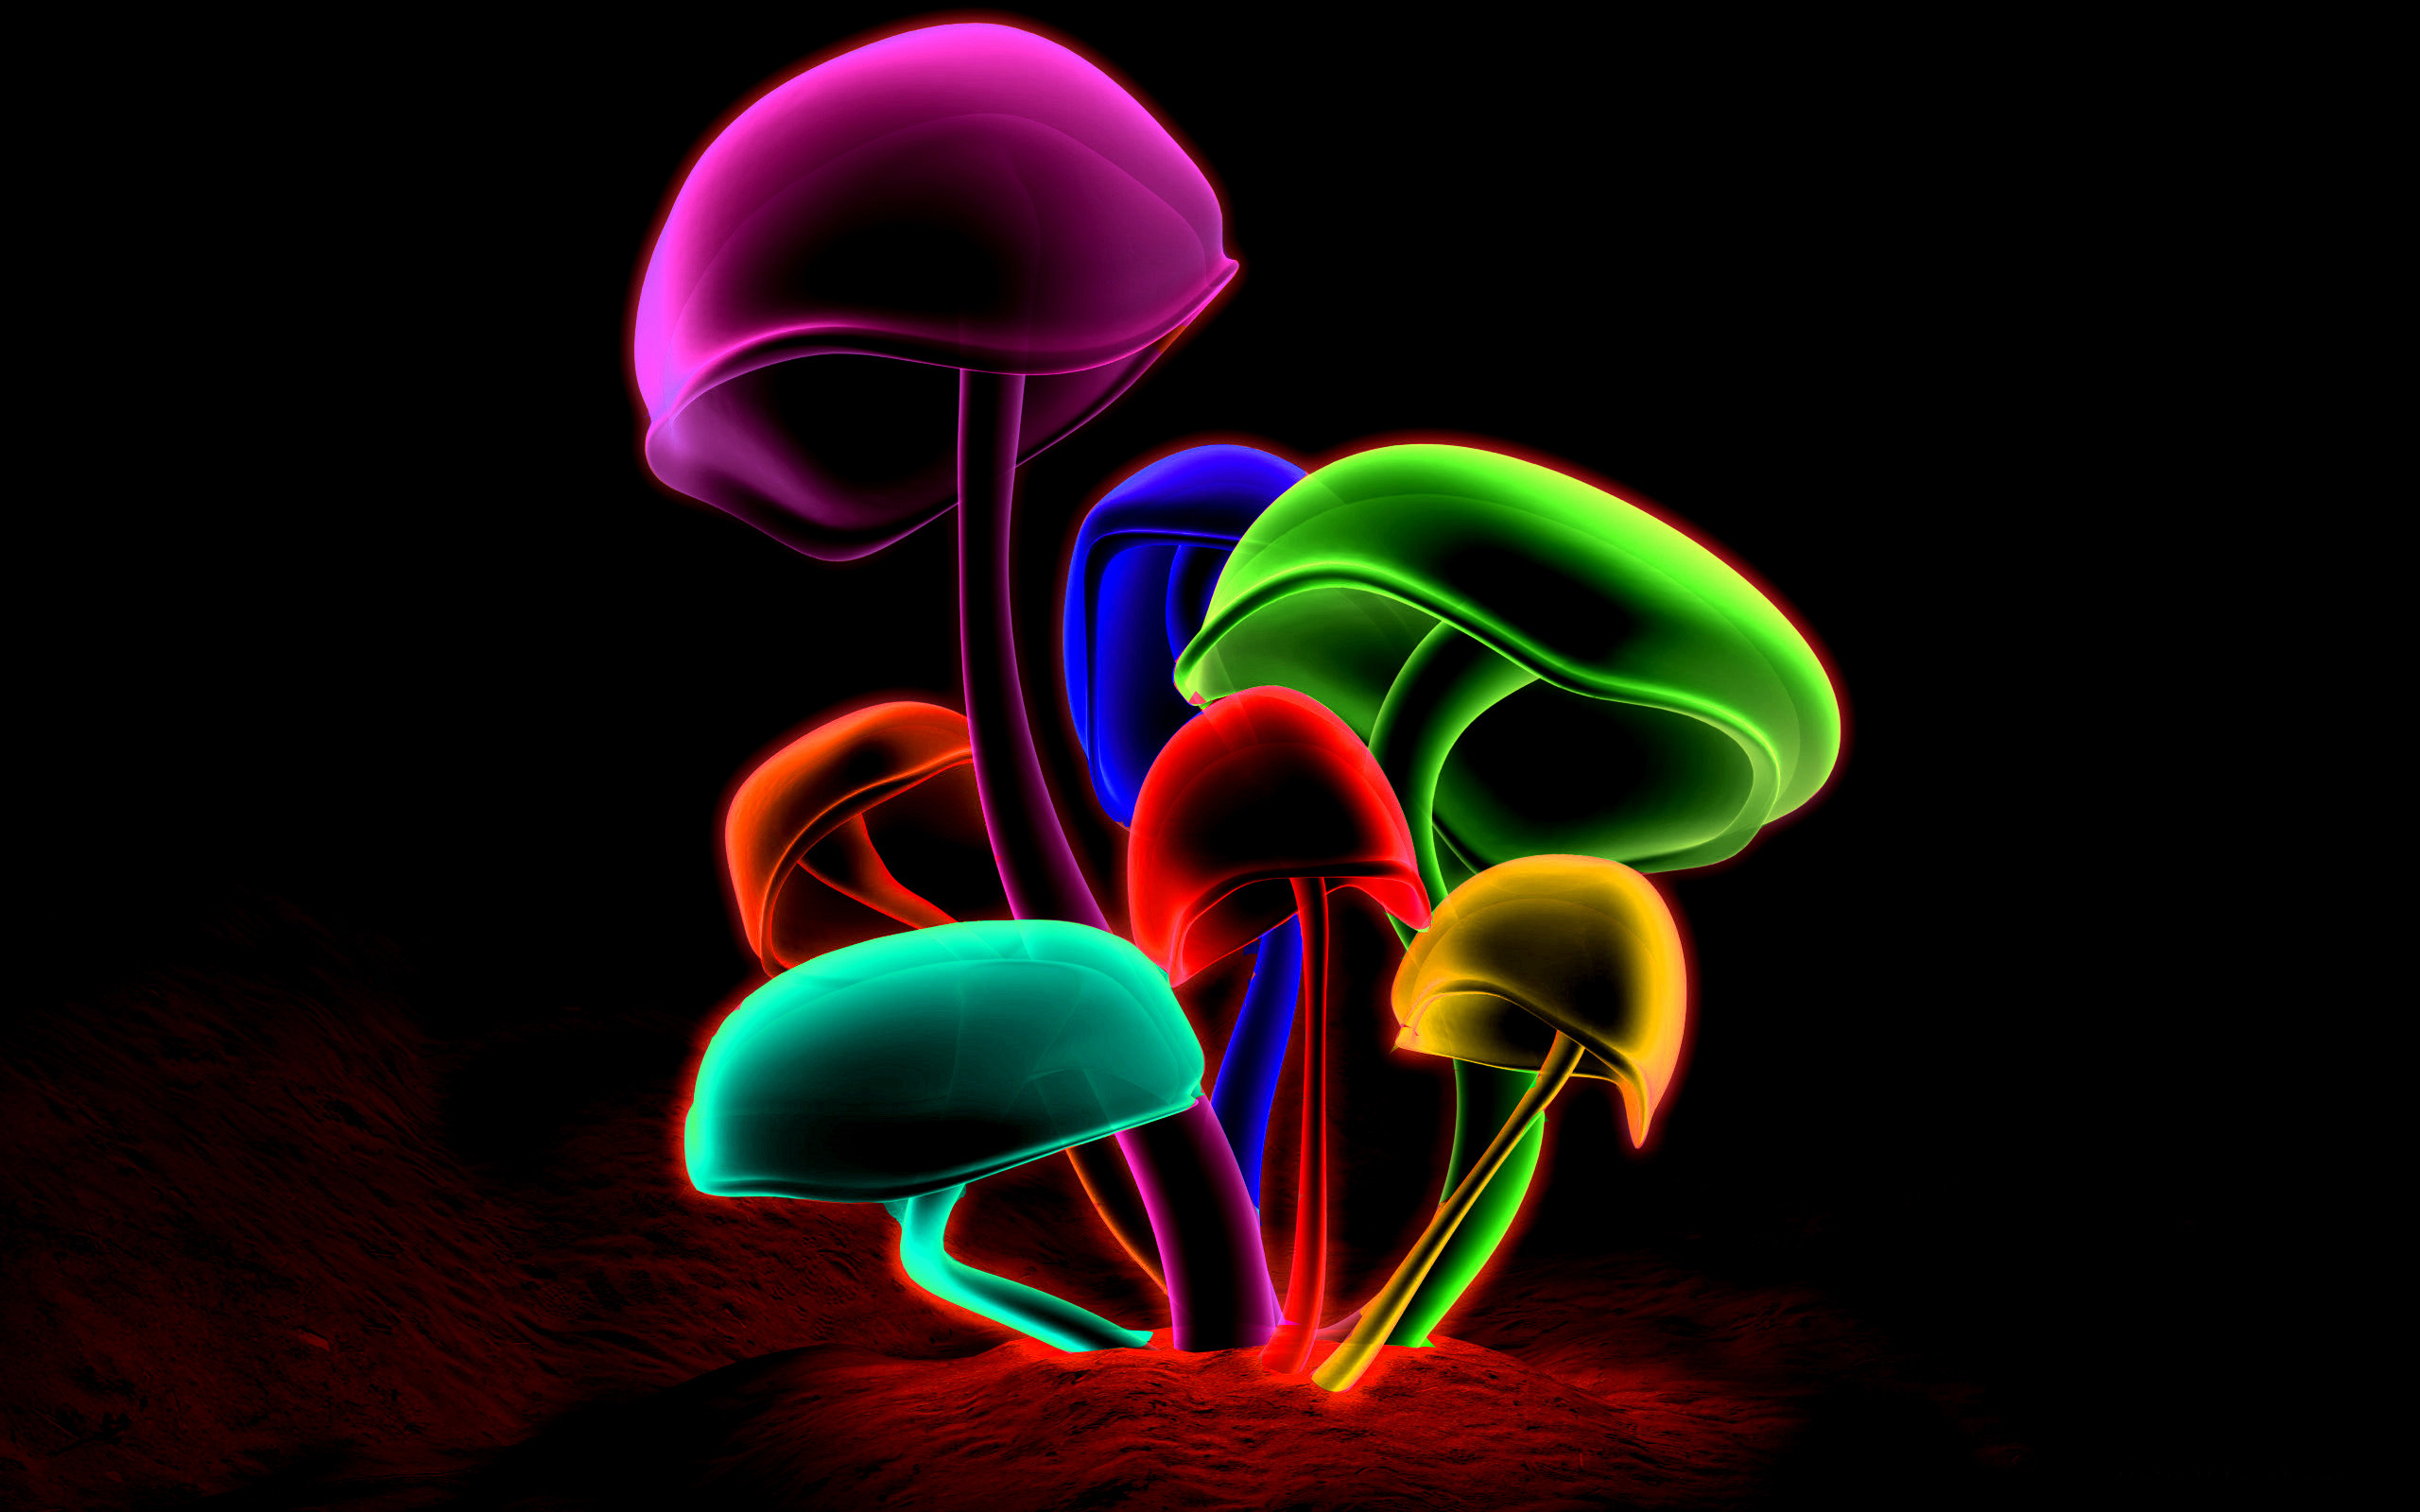 Colorful Mushrooms wallpaper with resolution up to – 21995